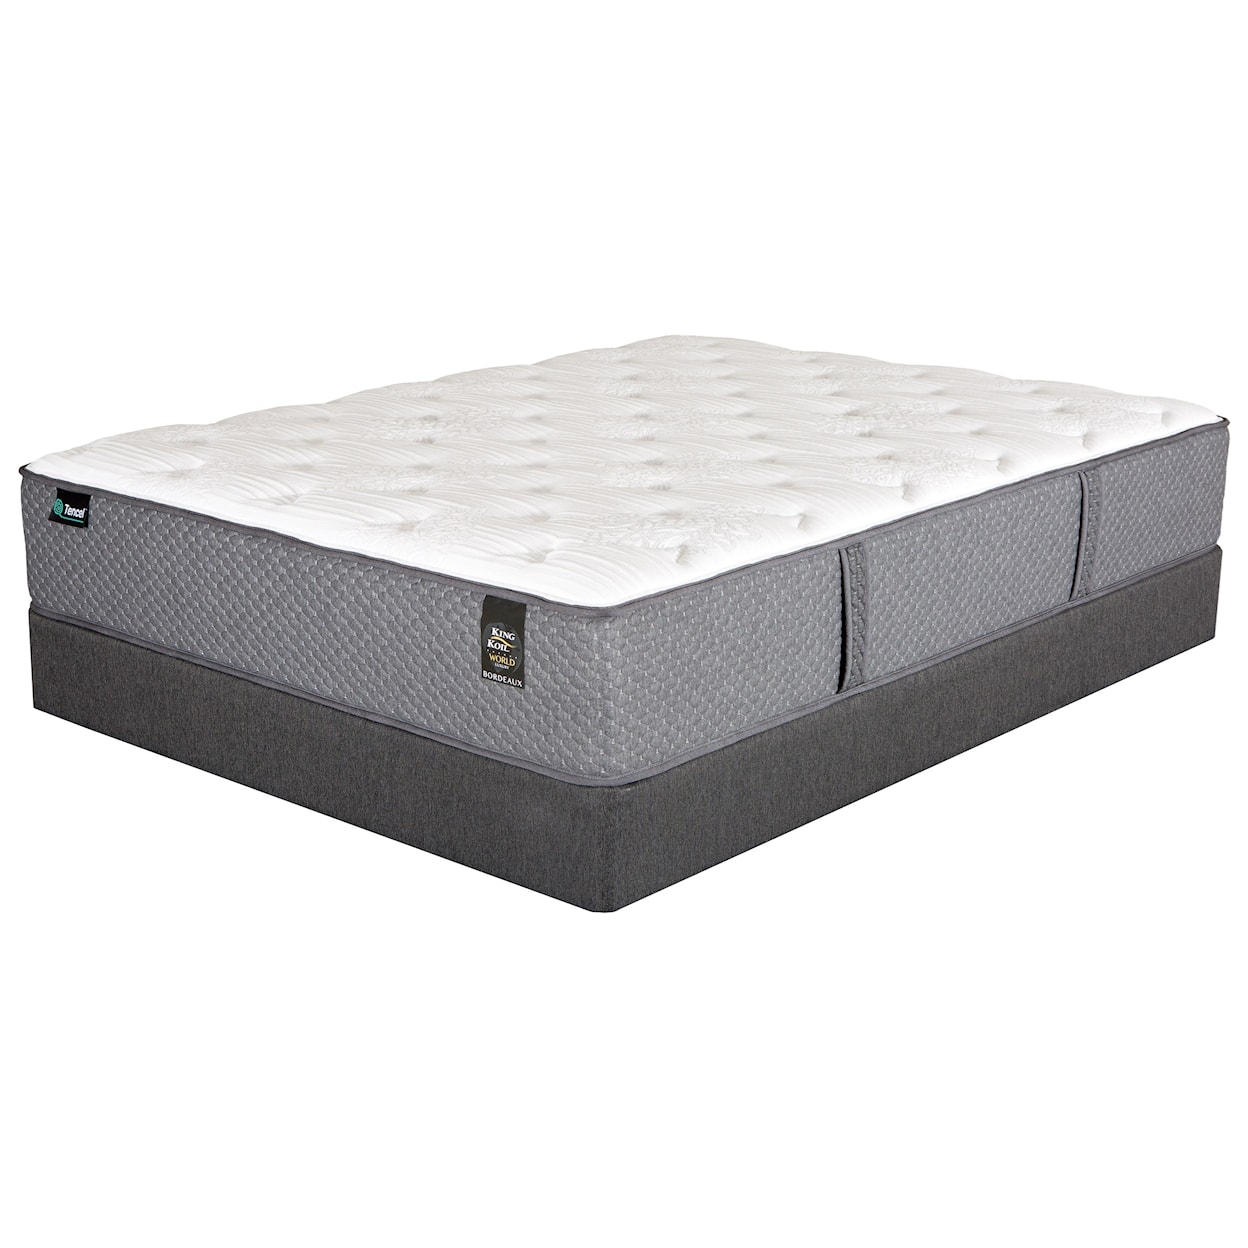 King Koil Beaumont P King Pocketed Coil Mattress Set